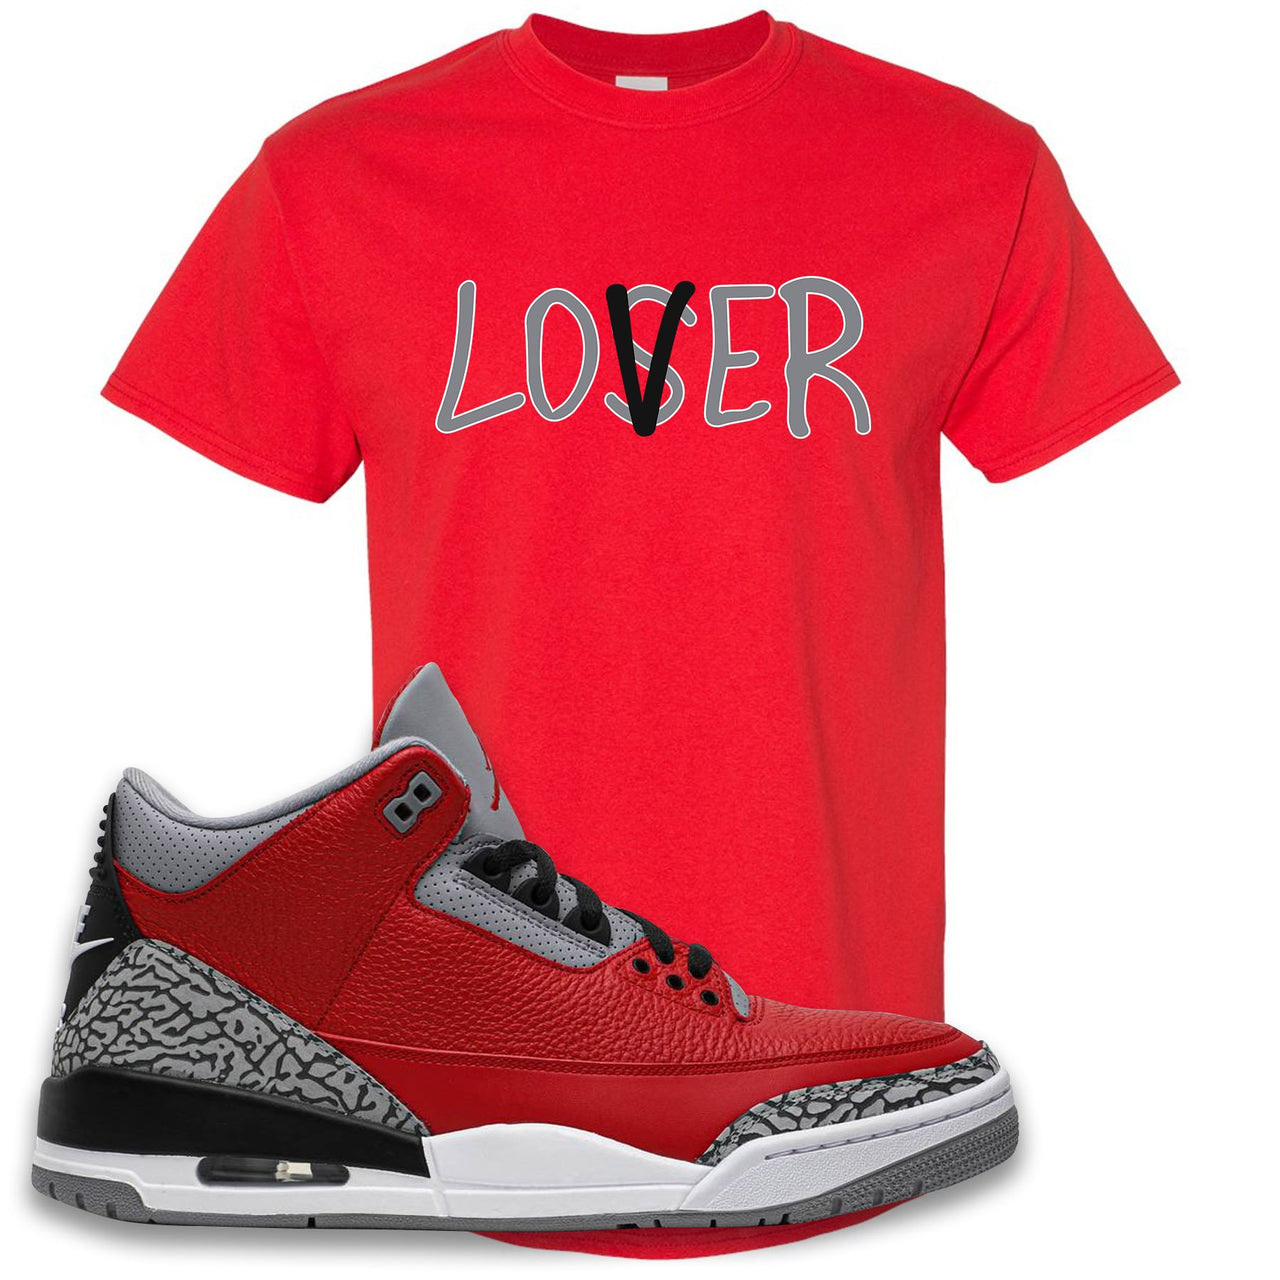 Jordan 3 Red Cement Chicago All-Star Sneaker True Red T Shirt | Tees to match Jordan 3 All Star Red Cement Shoes | Lover